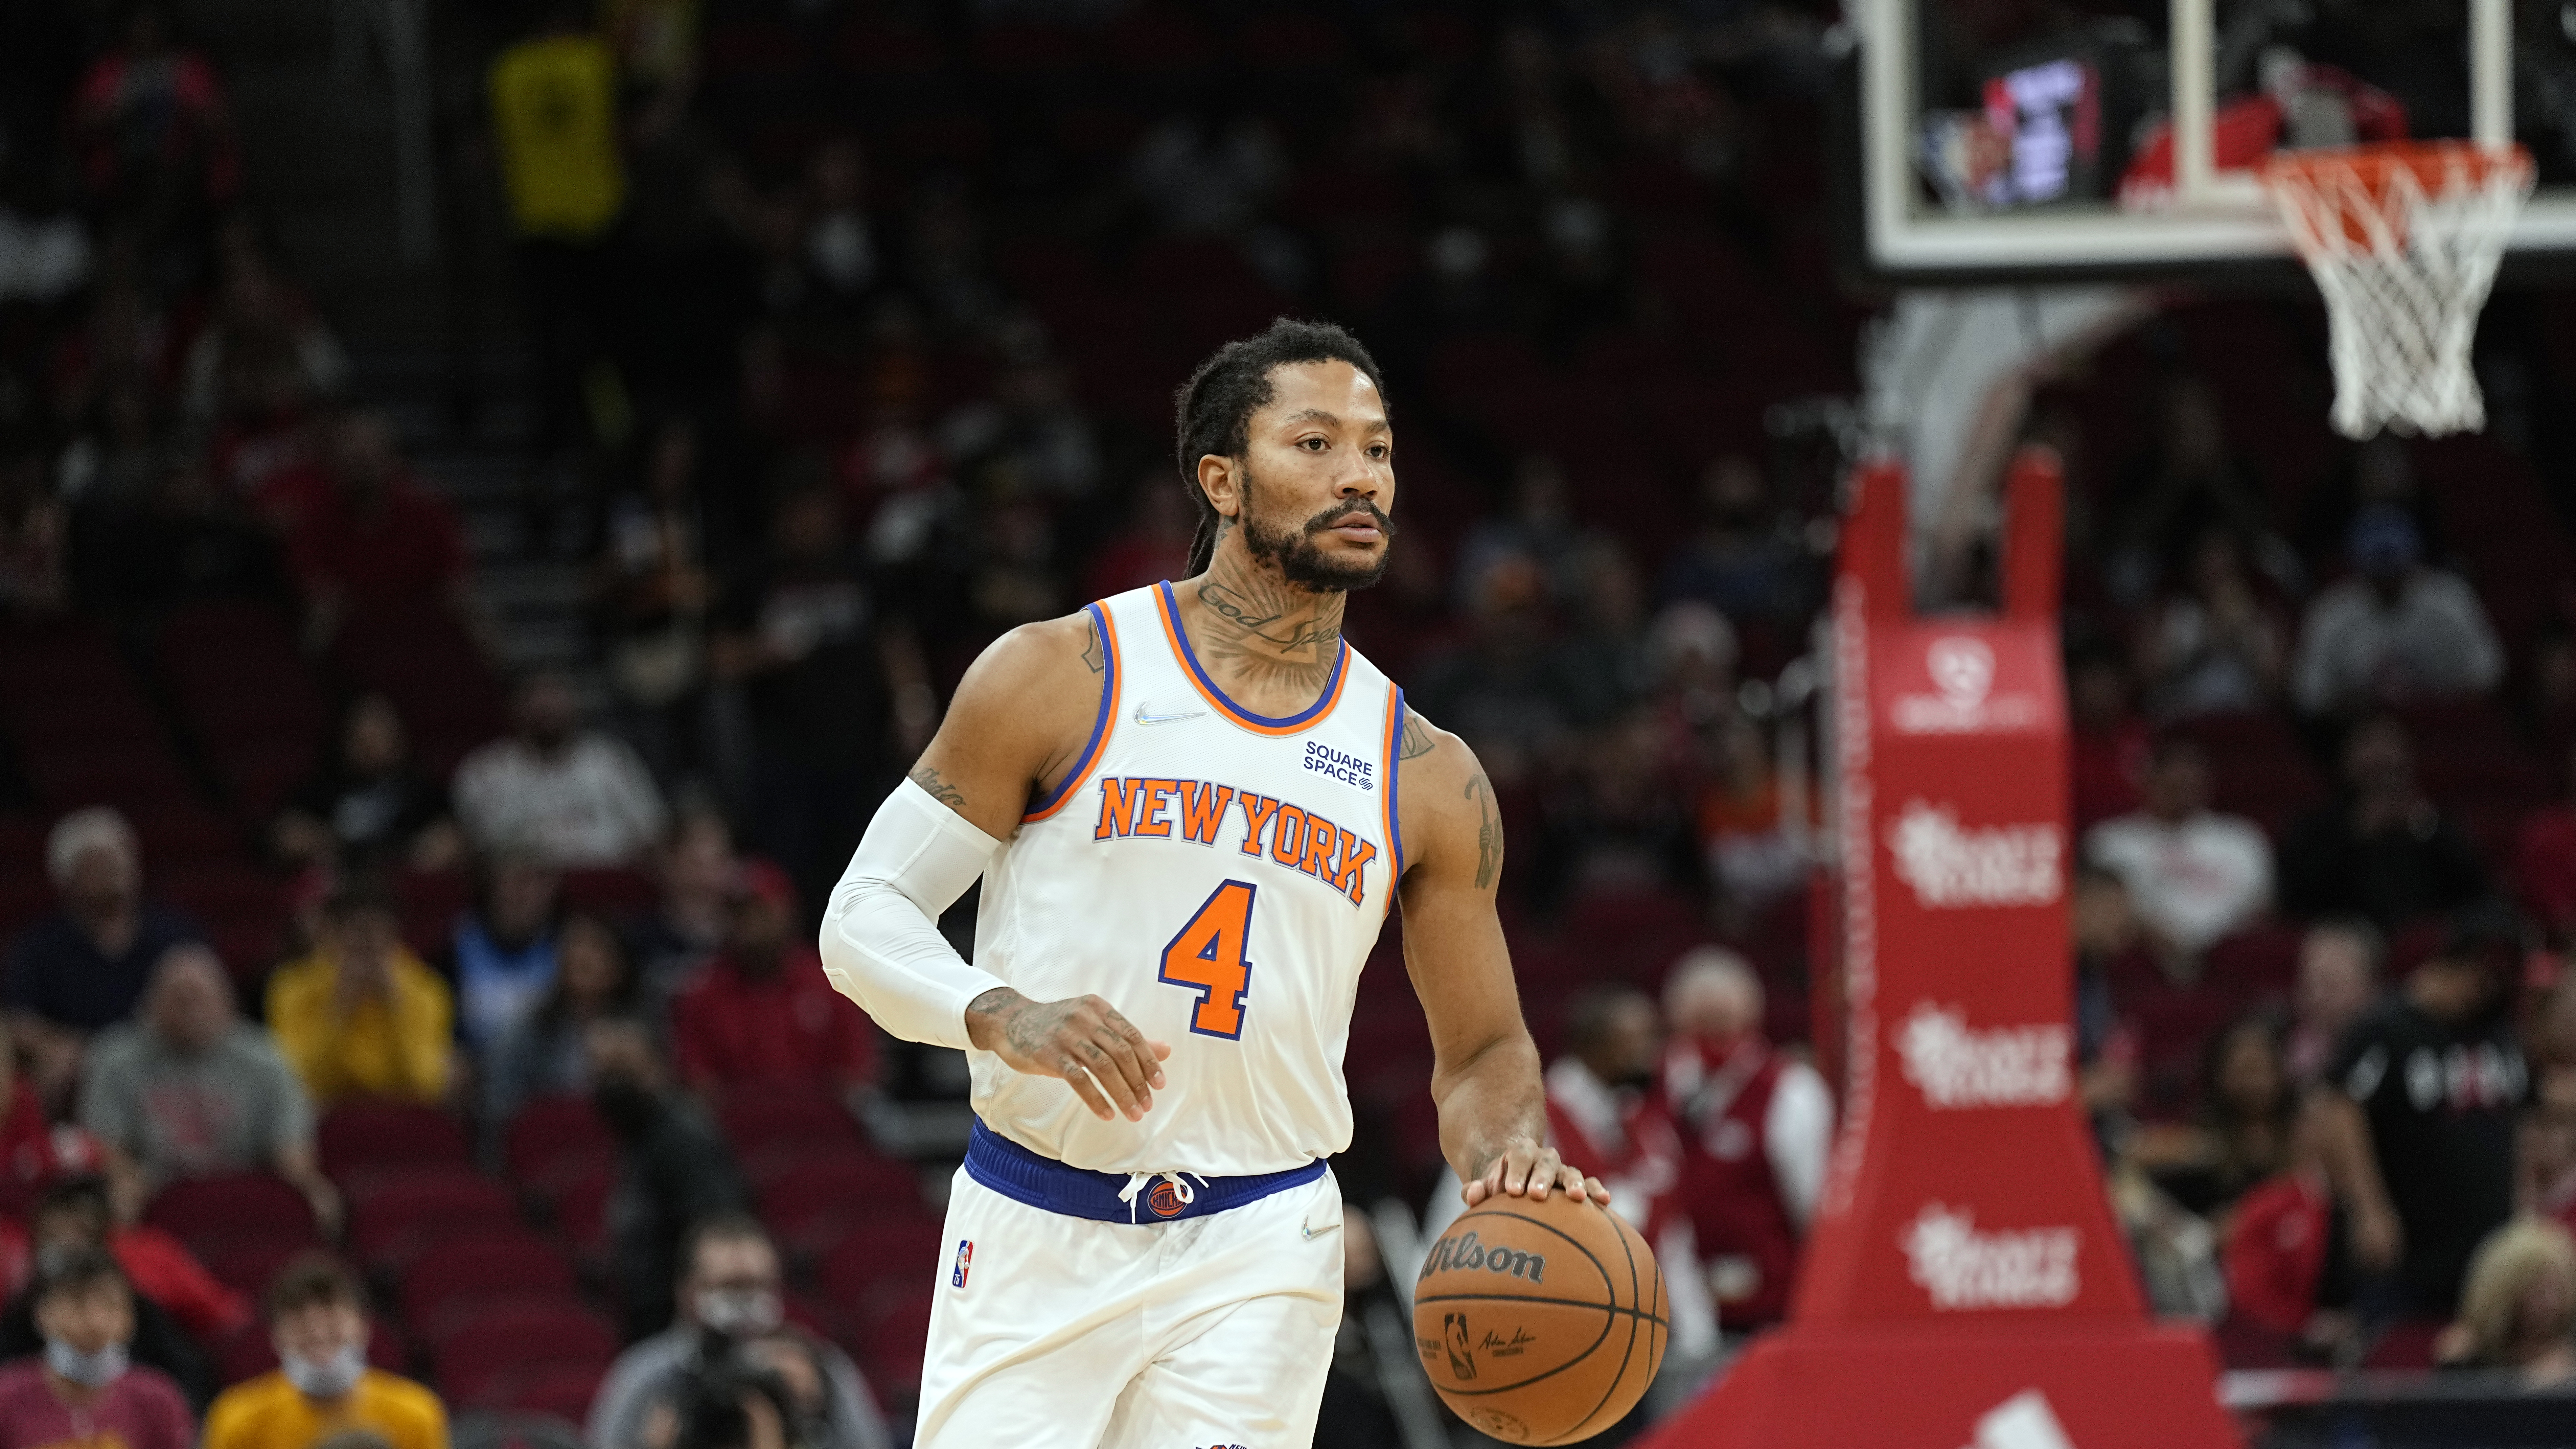 Knicks' Derrick Rose to Undergo Surgery on Ankle Injury; Recovery Timeline TBD